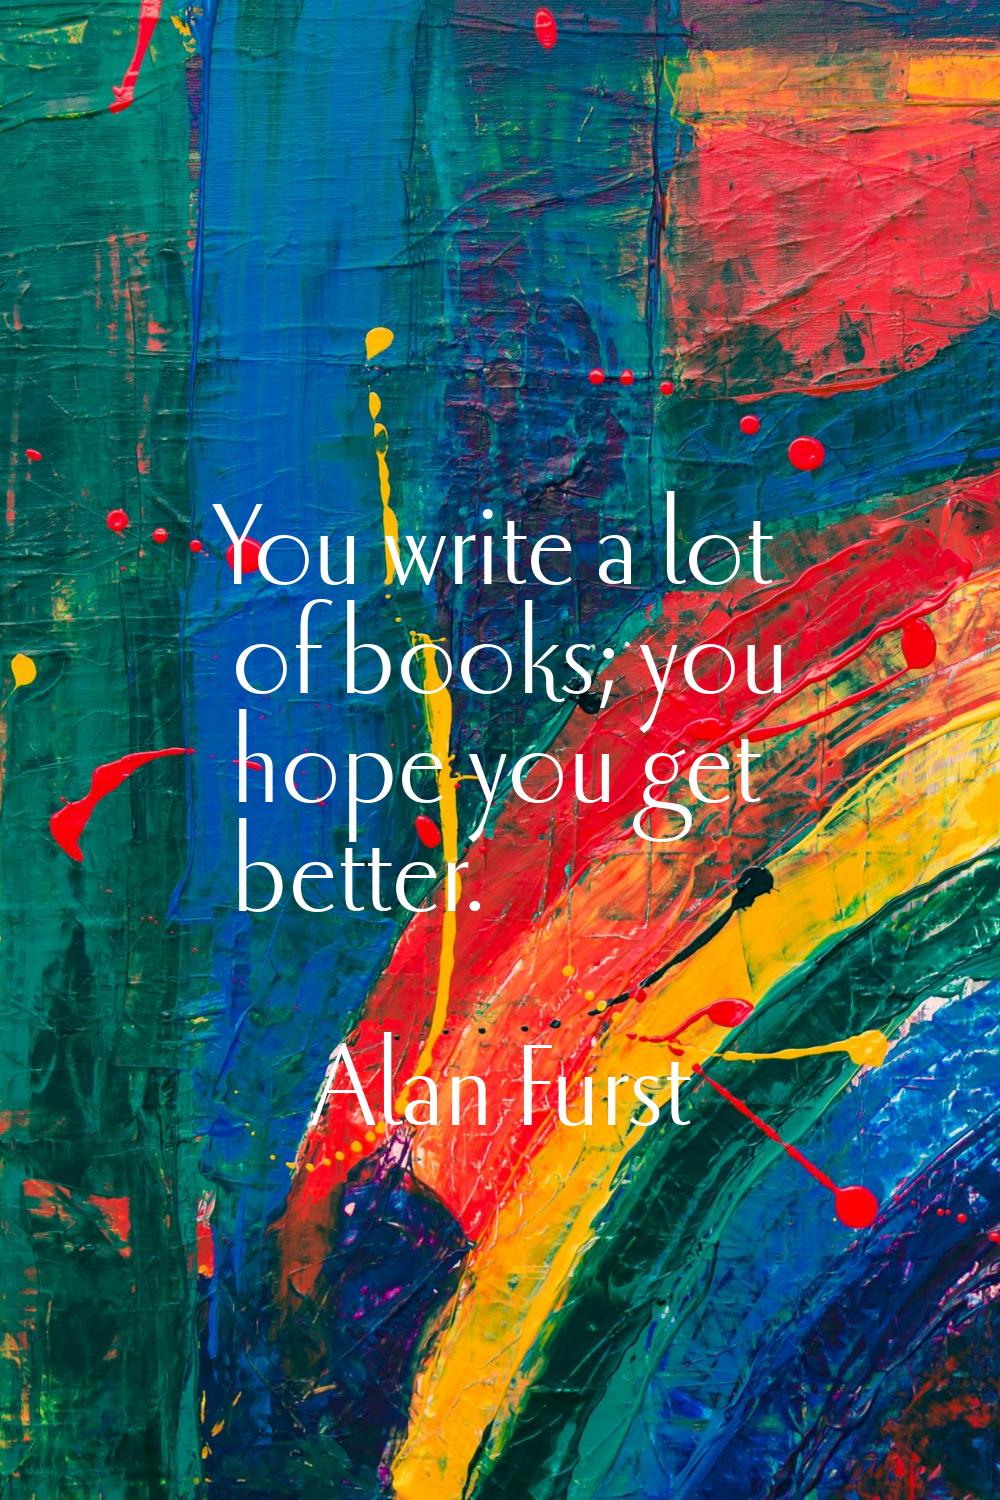 You write a lot of books; you hope you get better.